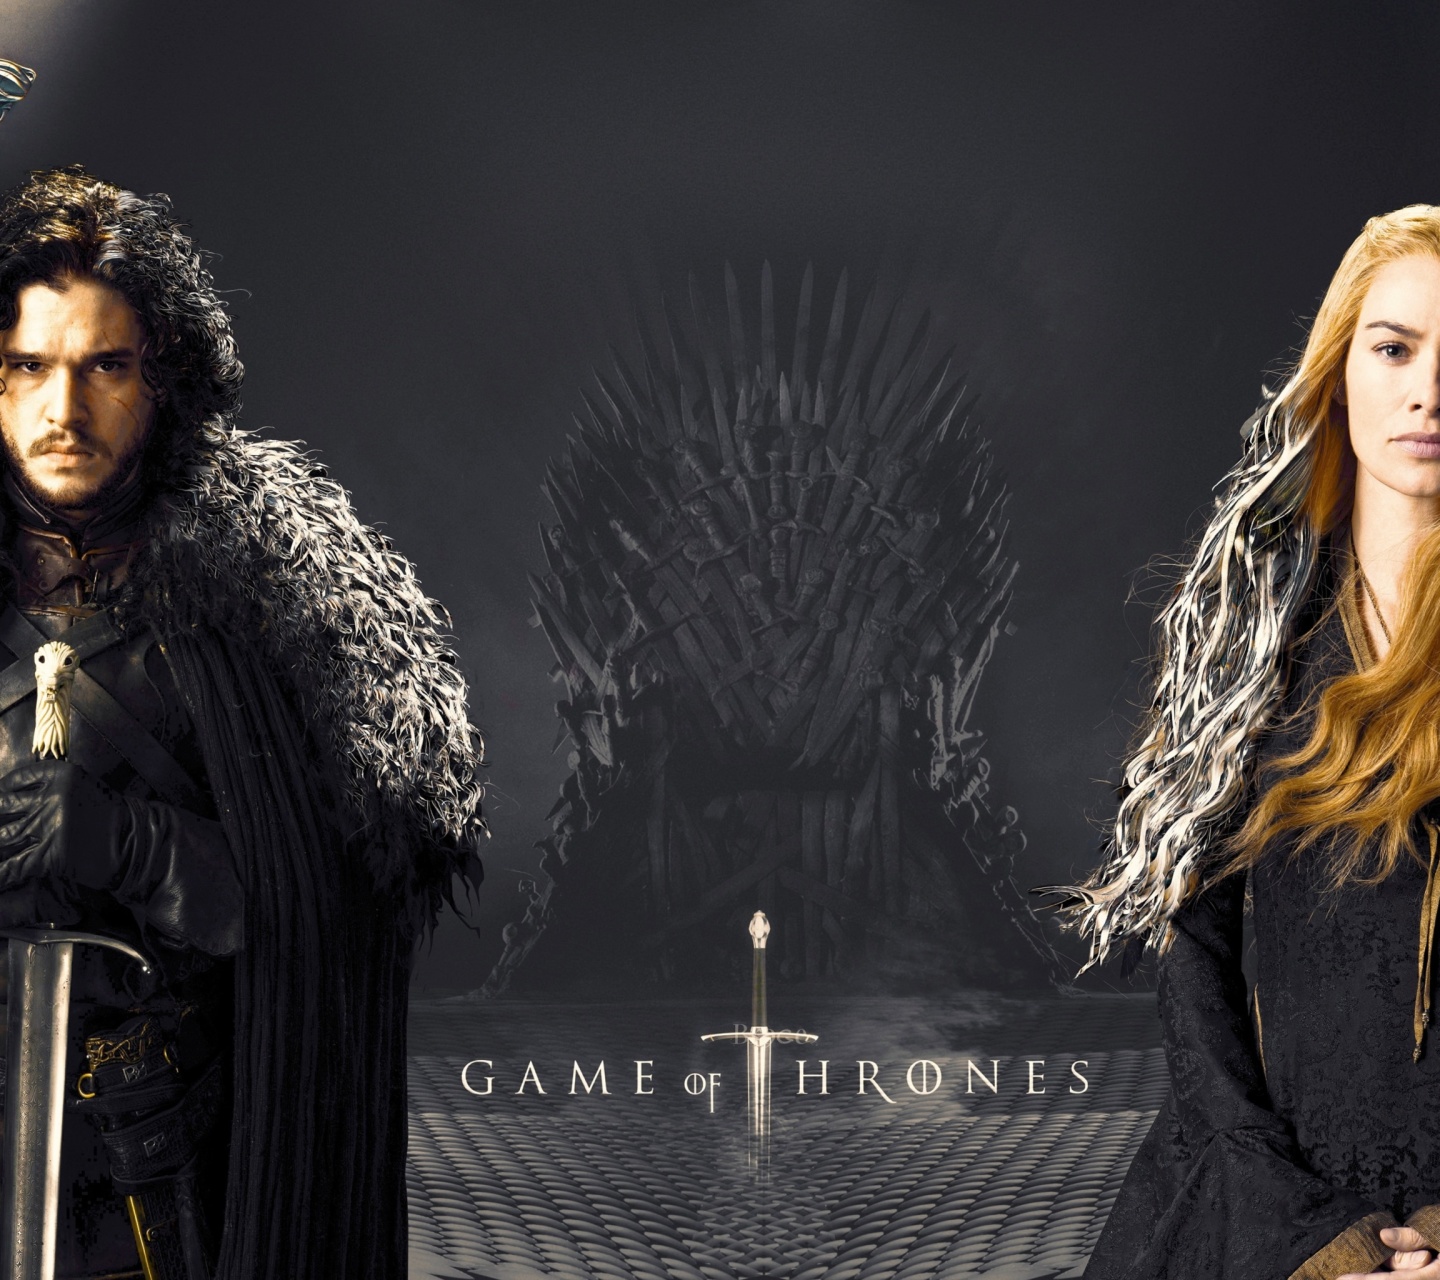 Game Of Thrones actors Jon Snow and Cersei Lannister screenshot #1 1440x1280